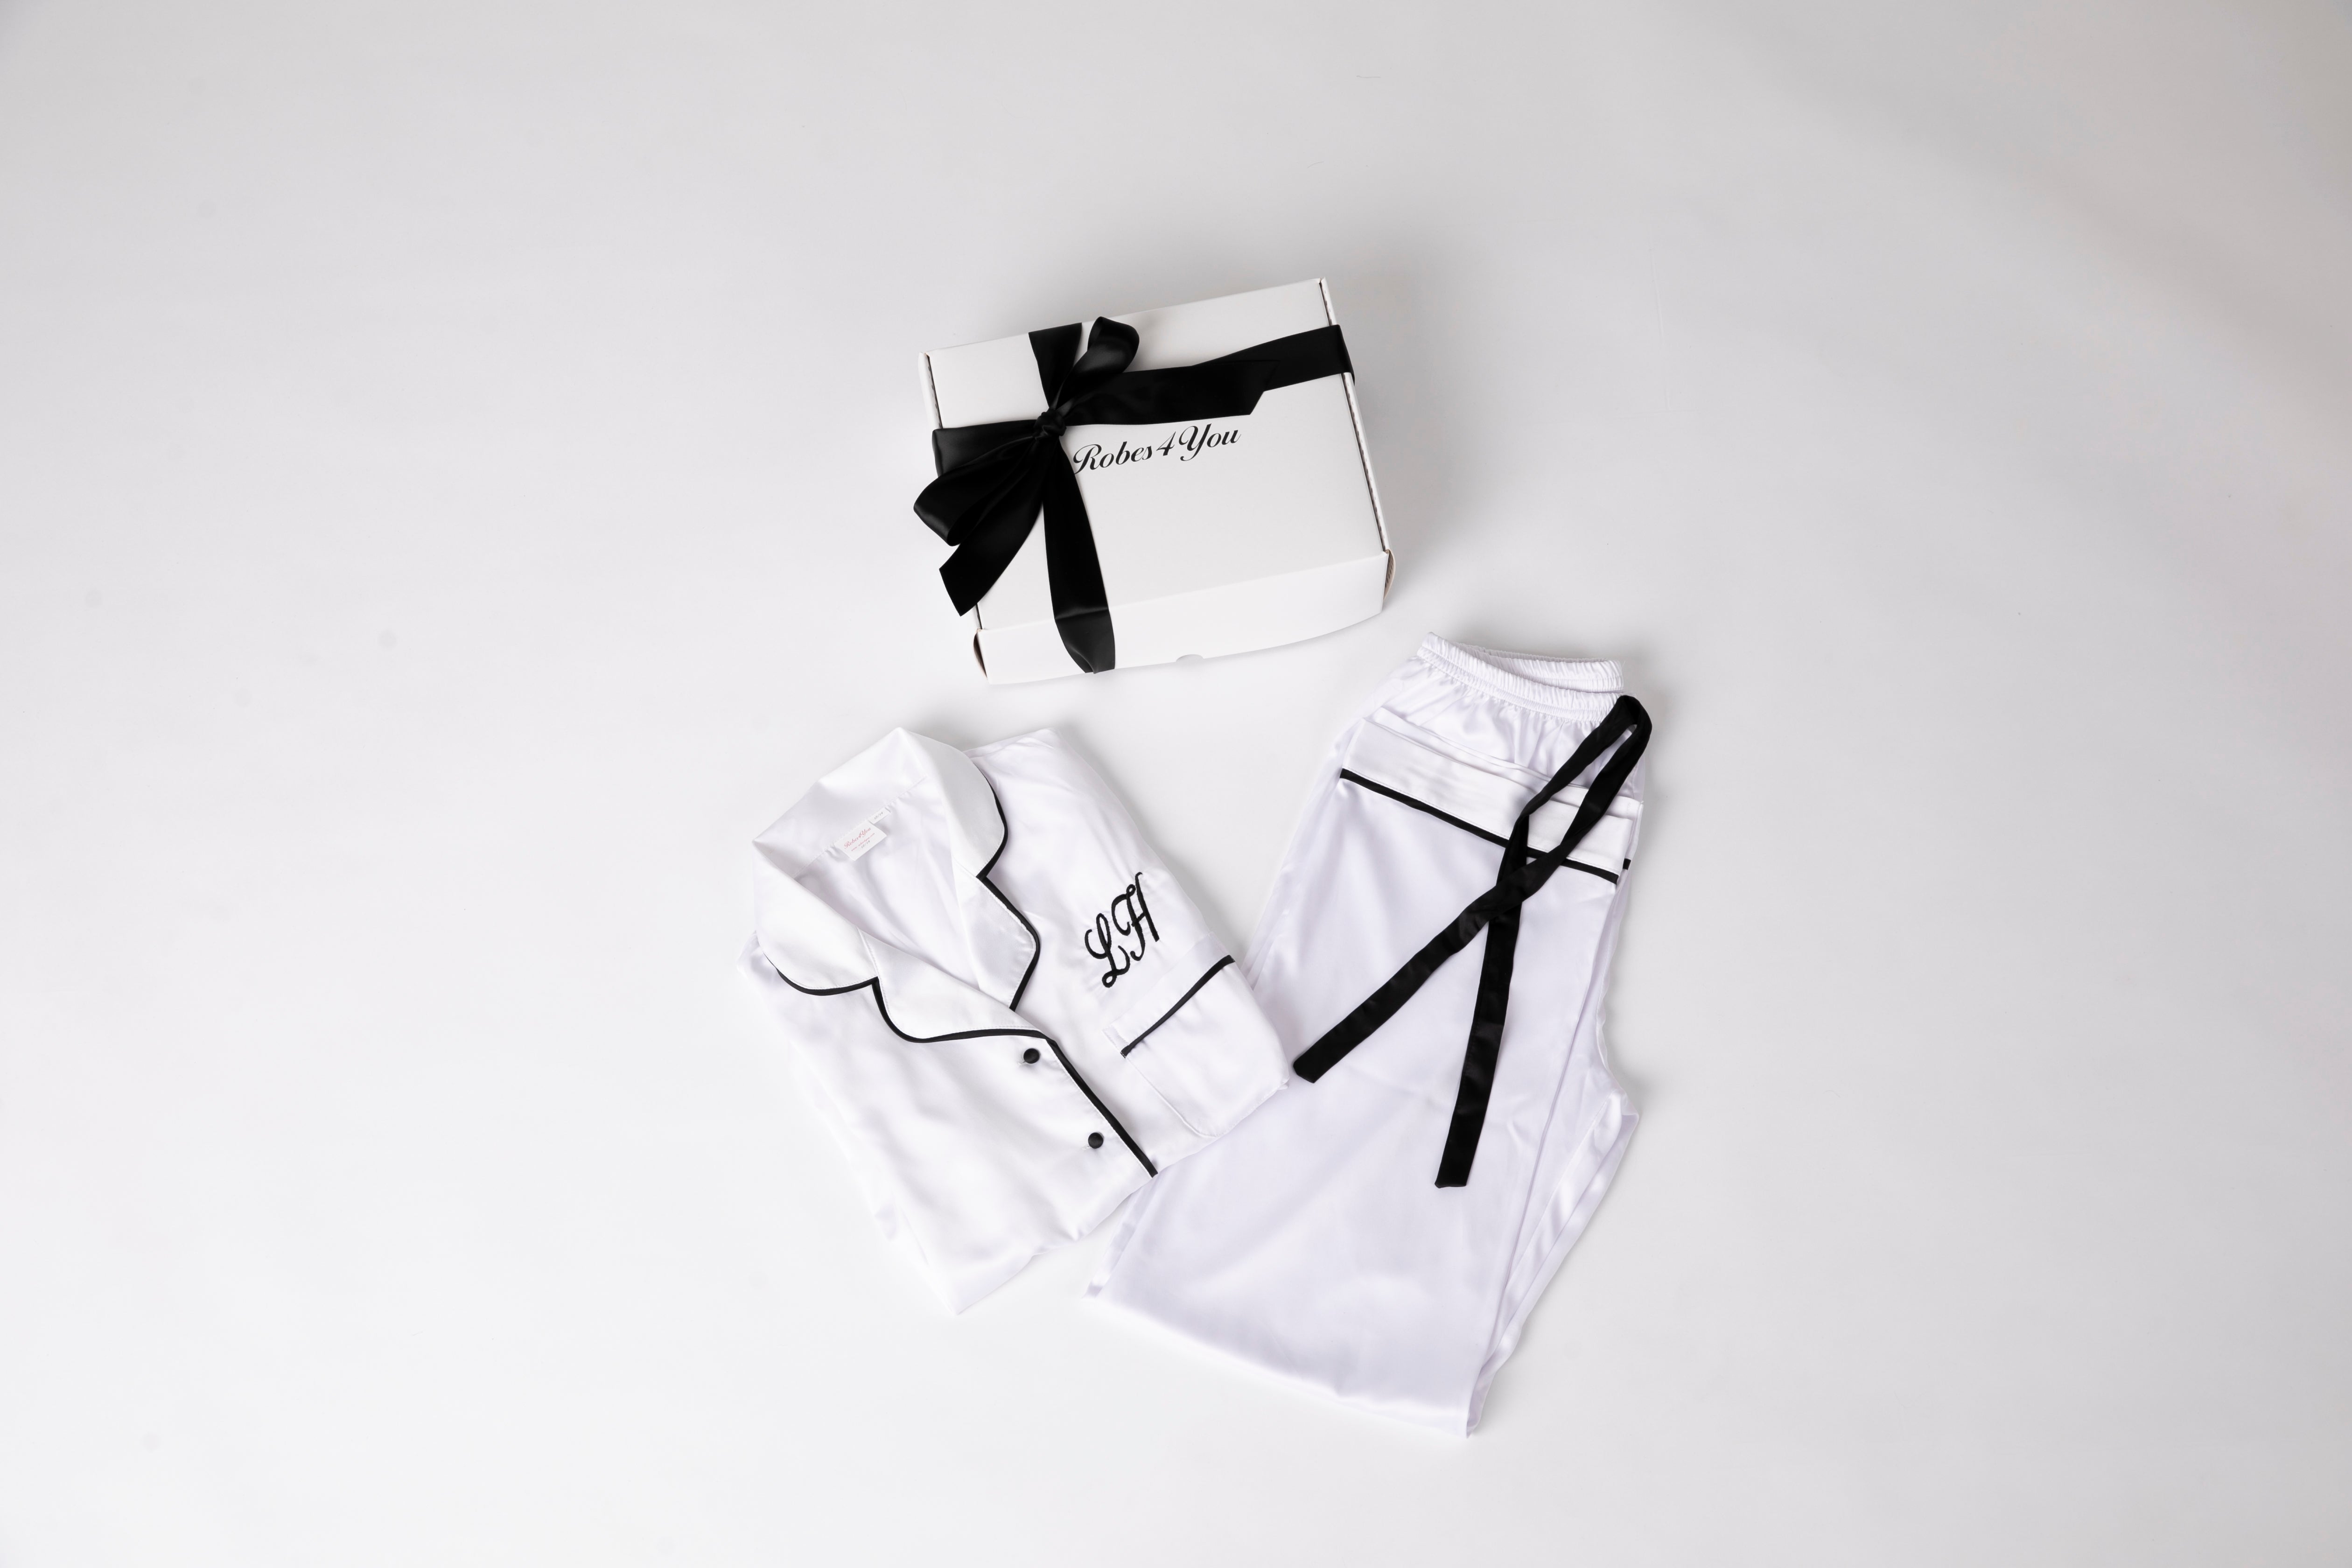 Personalised White Satin Pjs with Black Piping presented in a gift box with bow